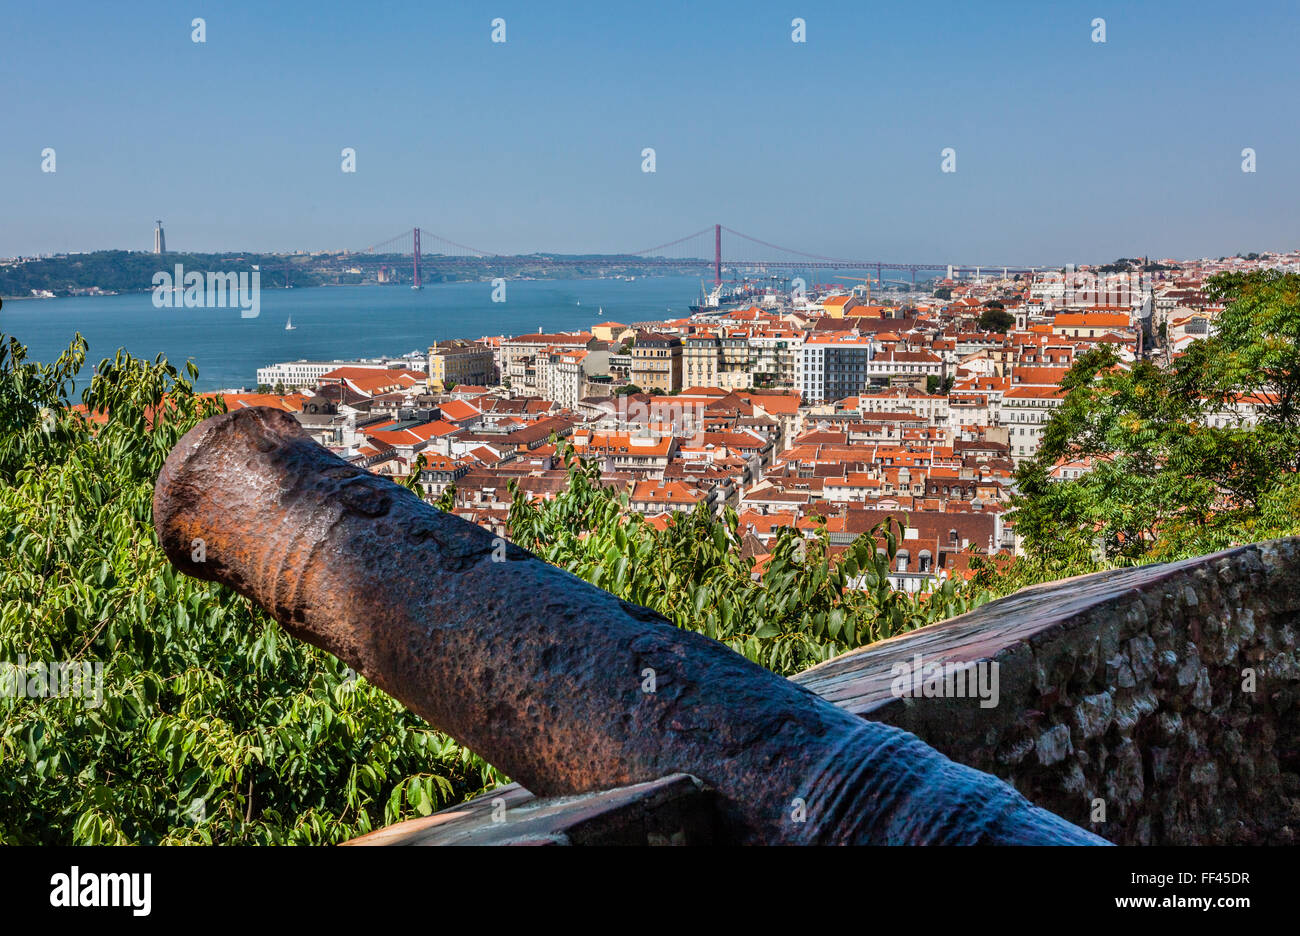 Portugal, Lisbon, a cannon at Castelo de Sao Jorge overlooking the Baixa Pombaline, the Pombaline Downtown of Lisbon Stock Photo